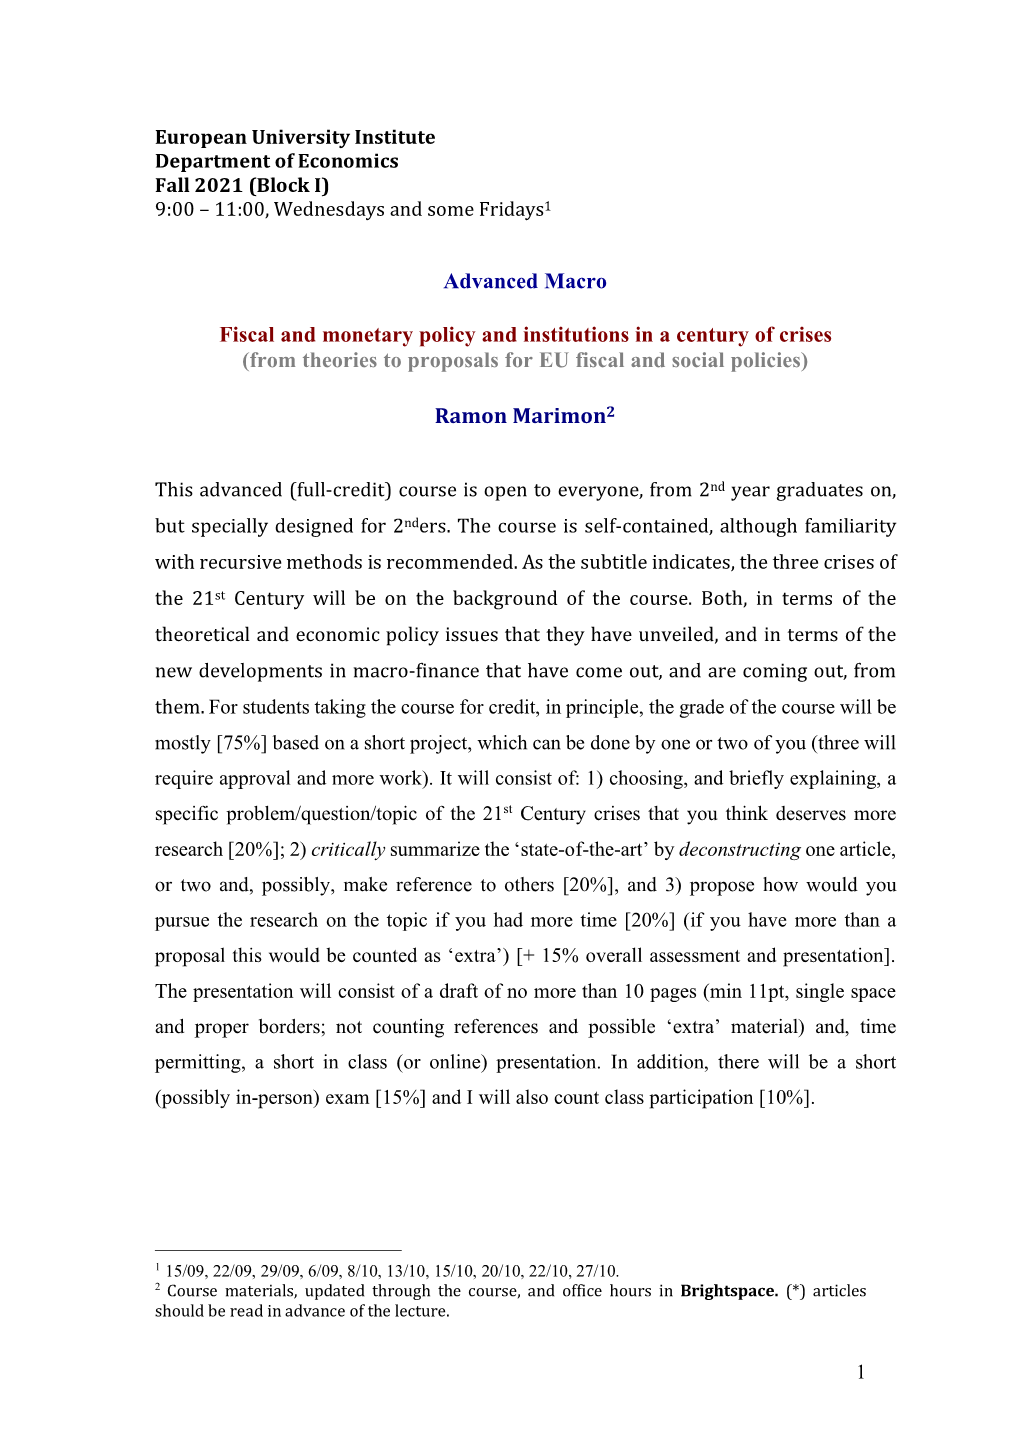 Fiscal and Monetary Policy and Institutions in a Century of Crises (From Theories to Proposals for EU Fiscal and Social Policies)